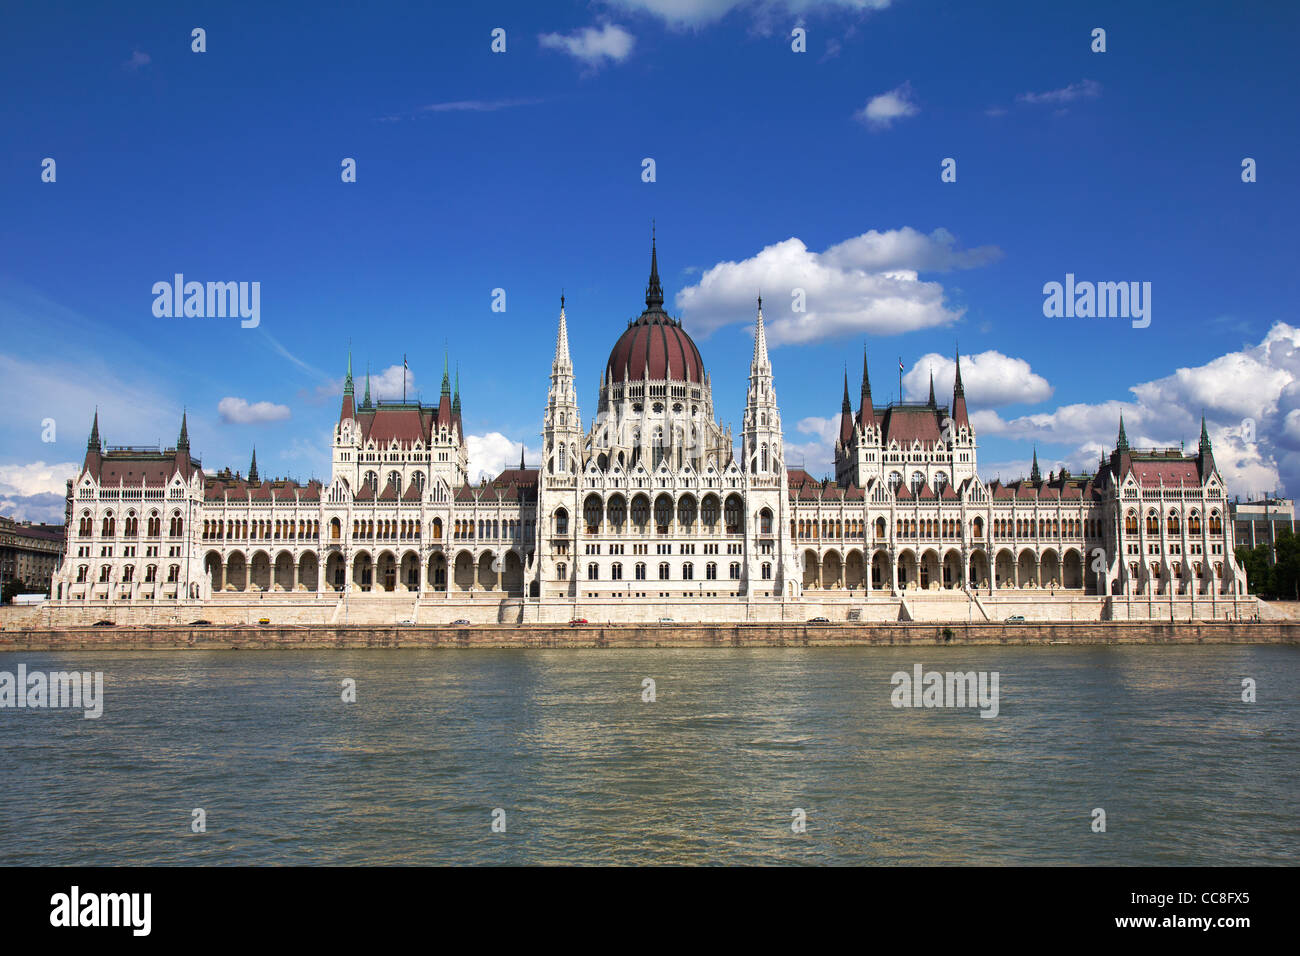 The Hungarian Parliament Building (Hungarian: Országház, which translates to House of the Country) Stock Photo